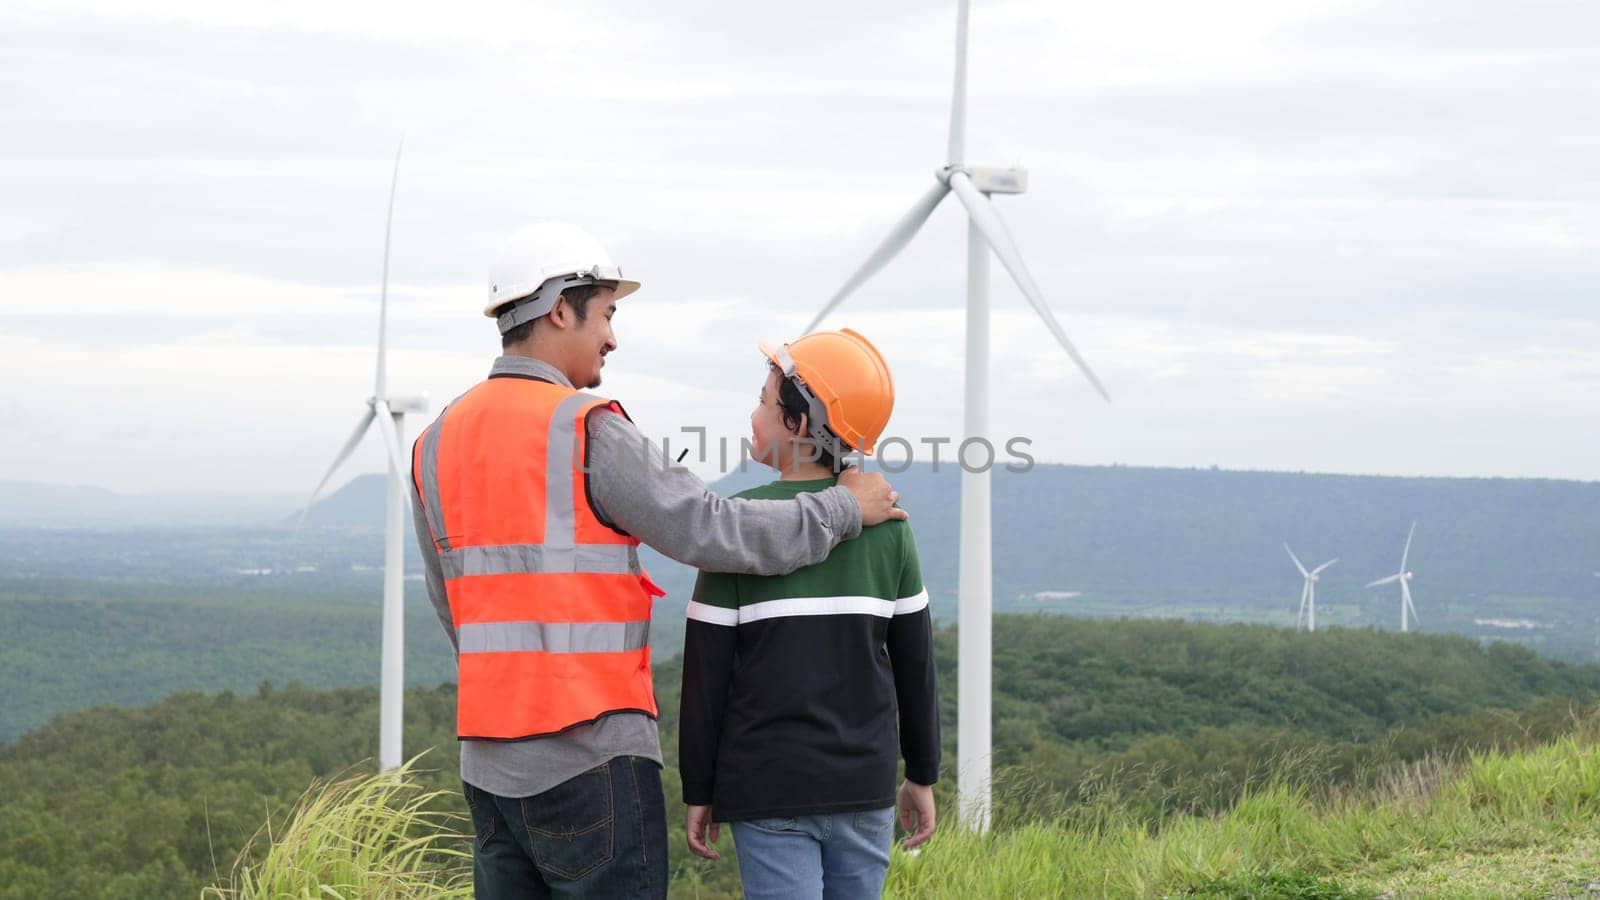 Engineer with his son on a wind farm atop a hill or mountain in the rural. Progressive ideal for the future production of renewable, sustainable energy. Energy generation from wind turbine.